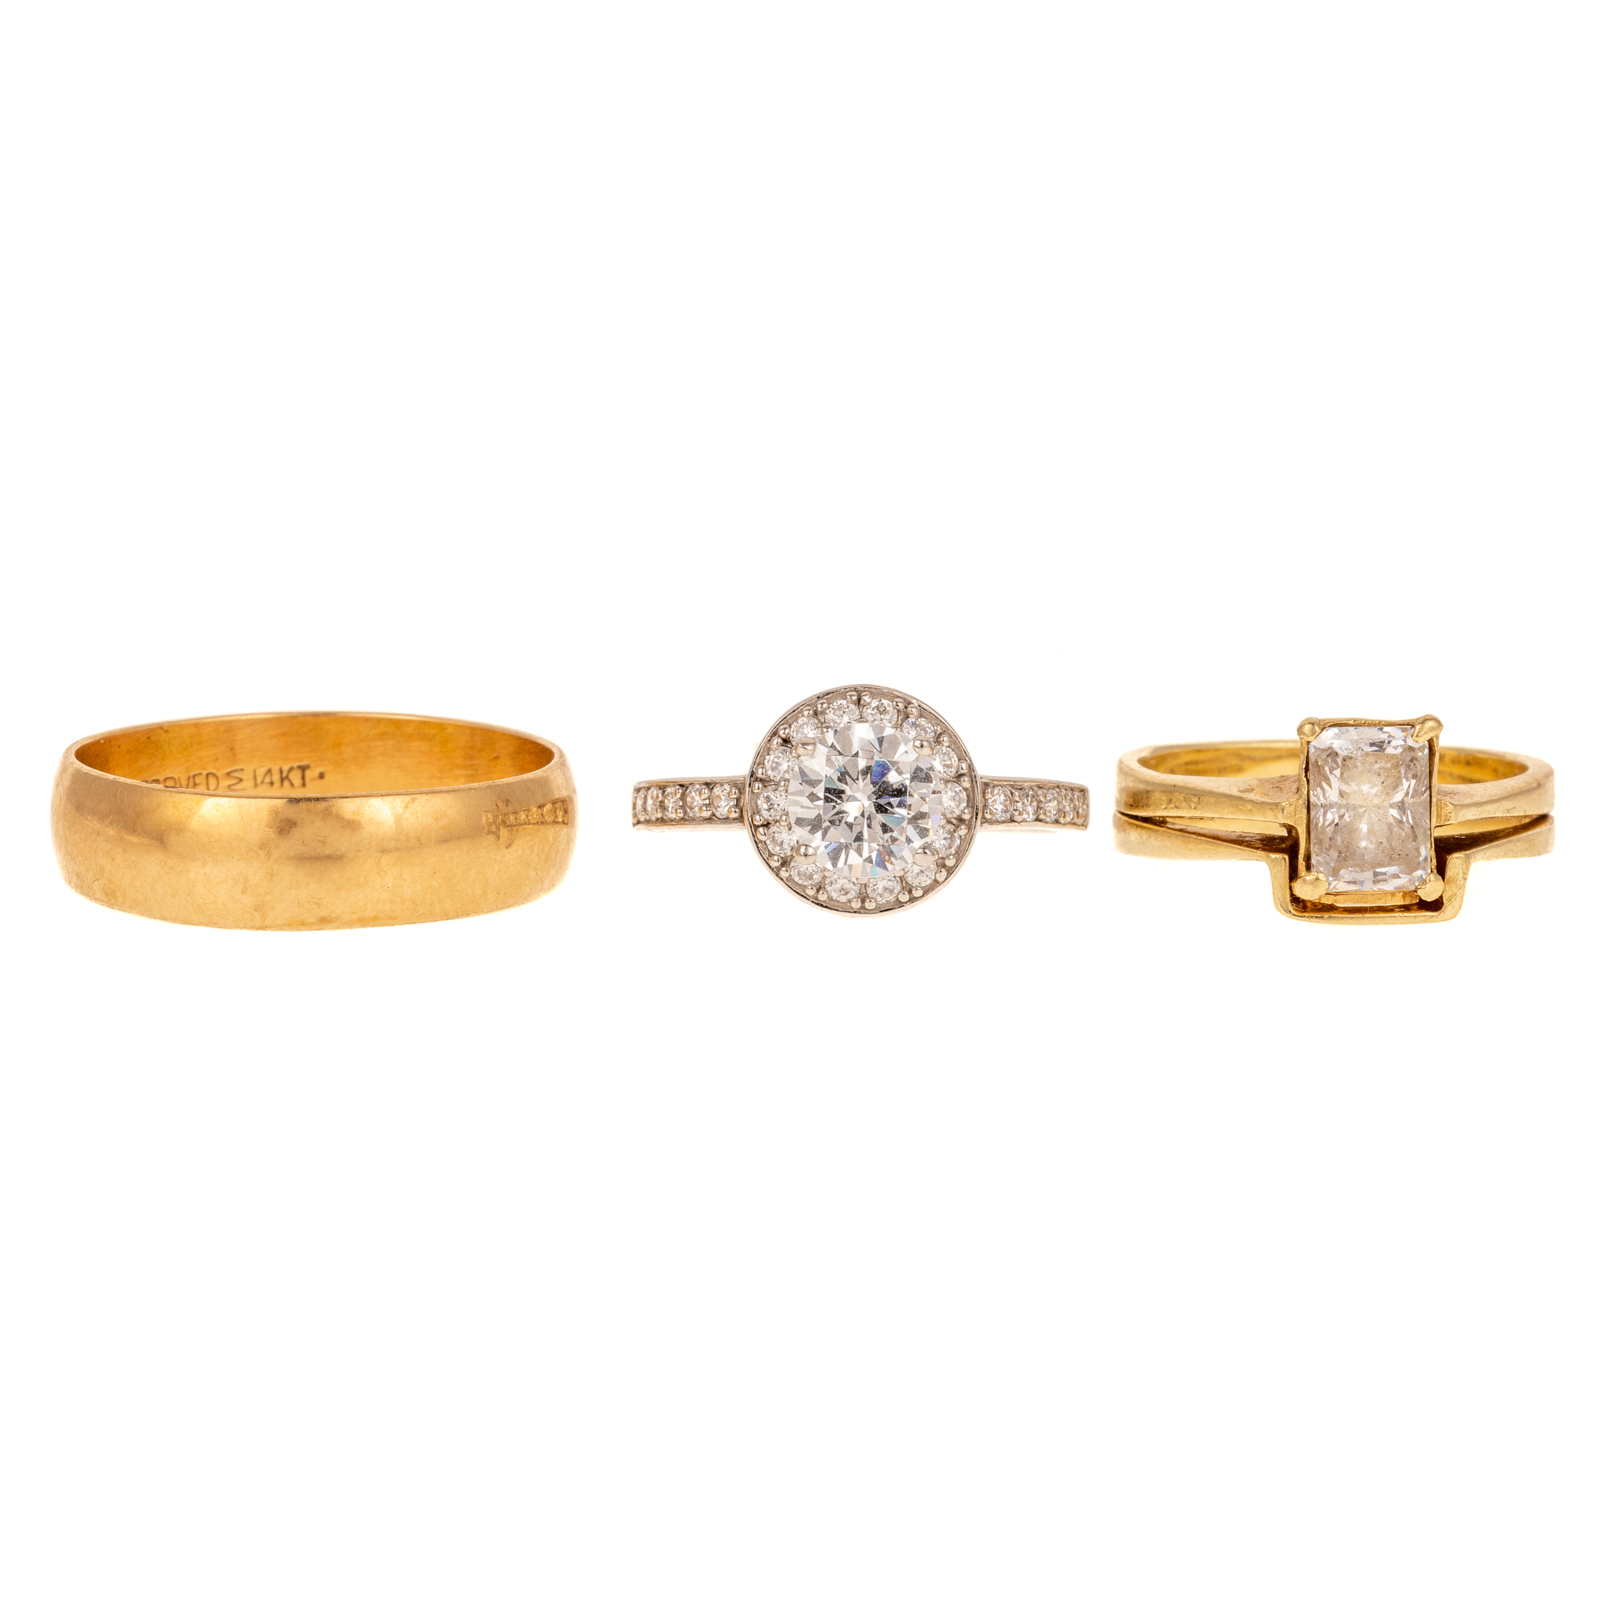 A TRIO OF 14K RINGS WITH CZ'S 1)